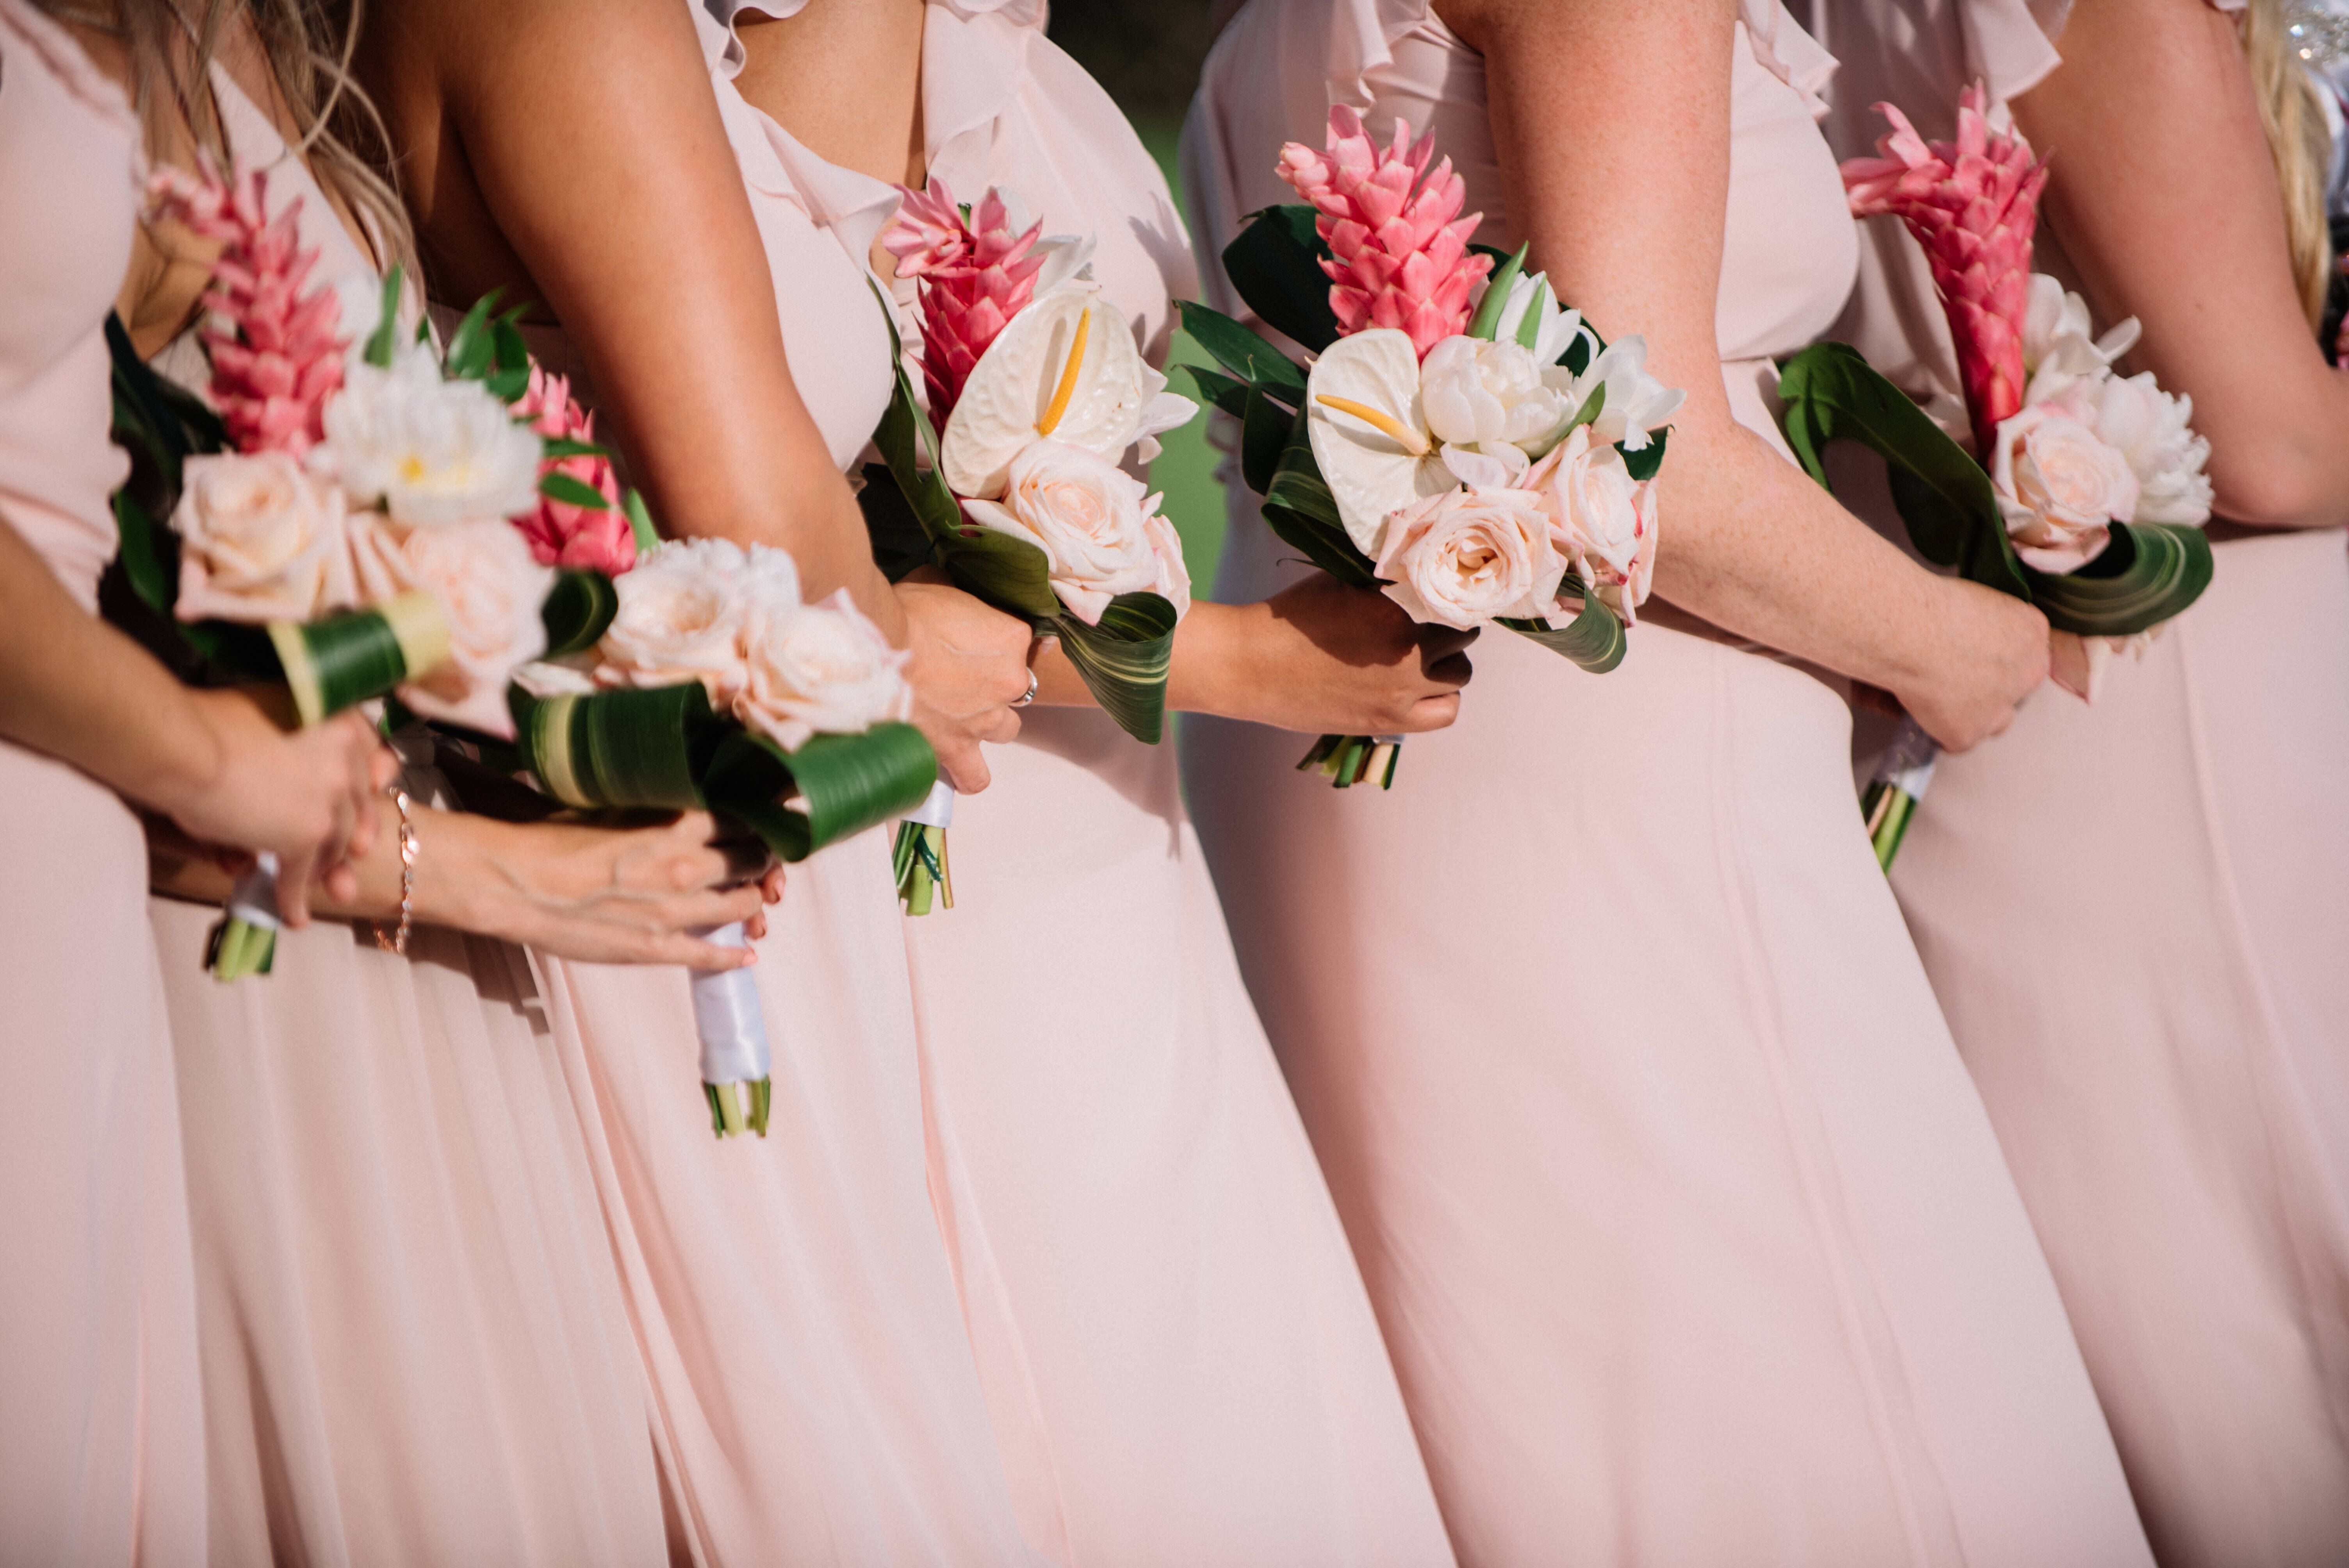 Bridesmaids With Pink Bouquets And Dresses